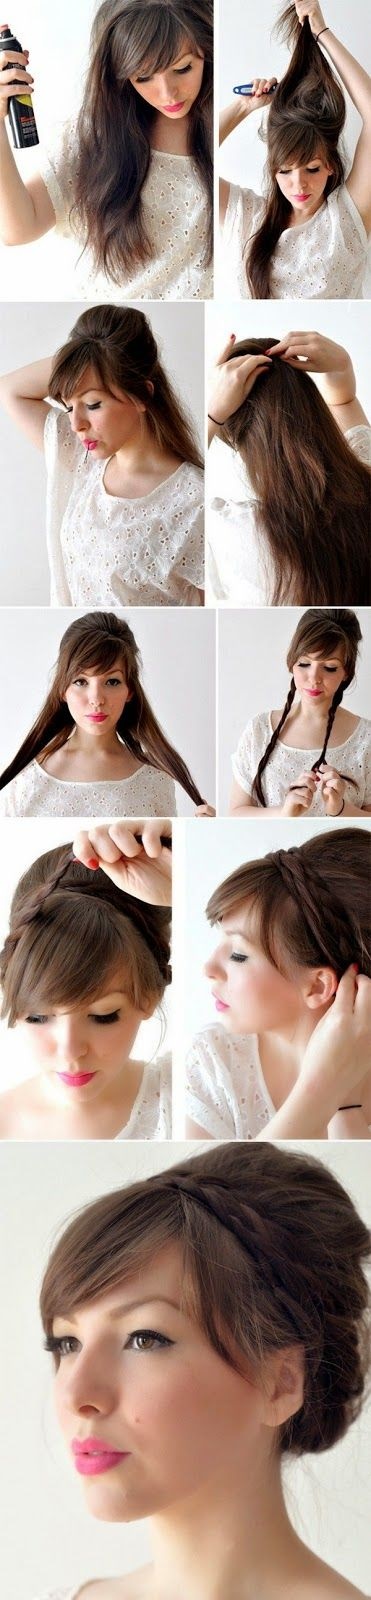 hairstyles-at-home-for-medium-hair-25_14 Hairstyles at home for medium hair